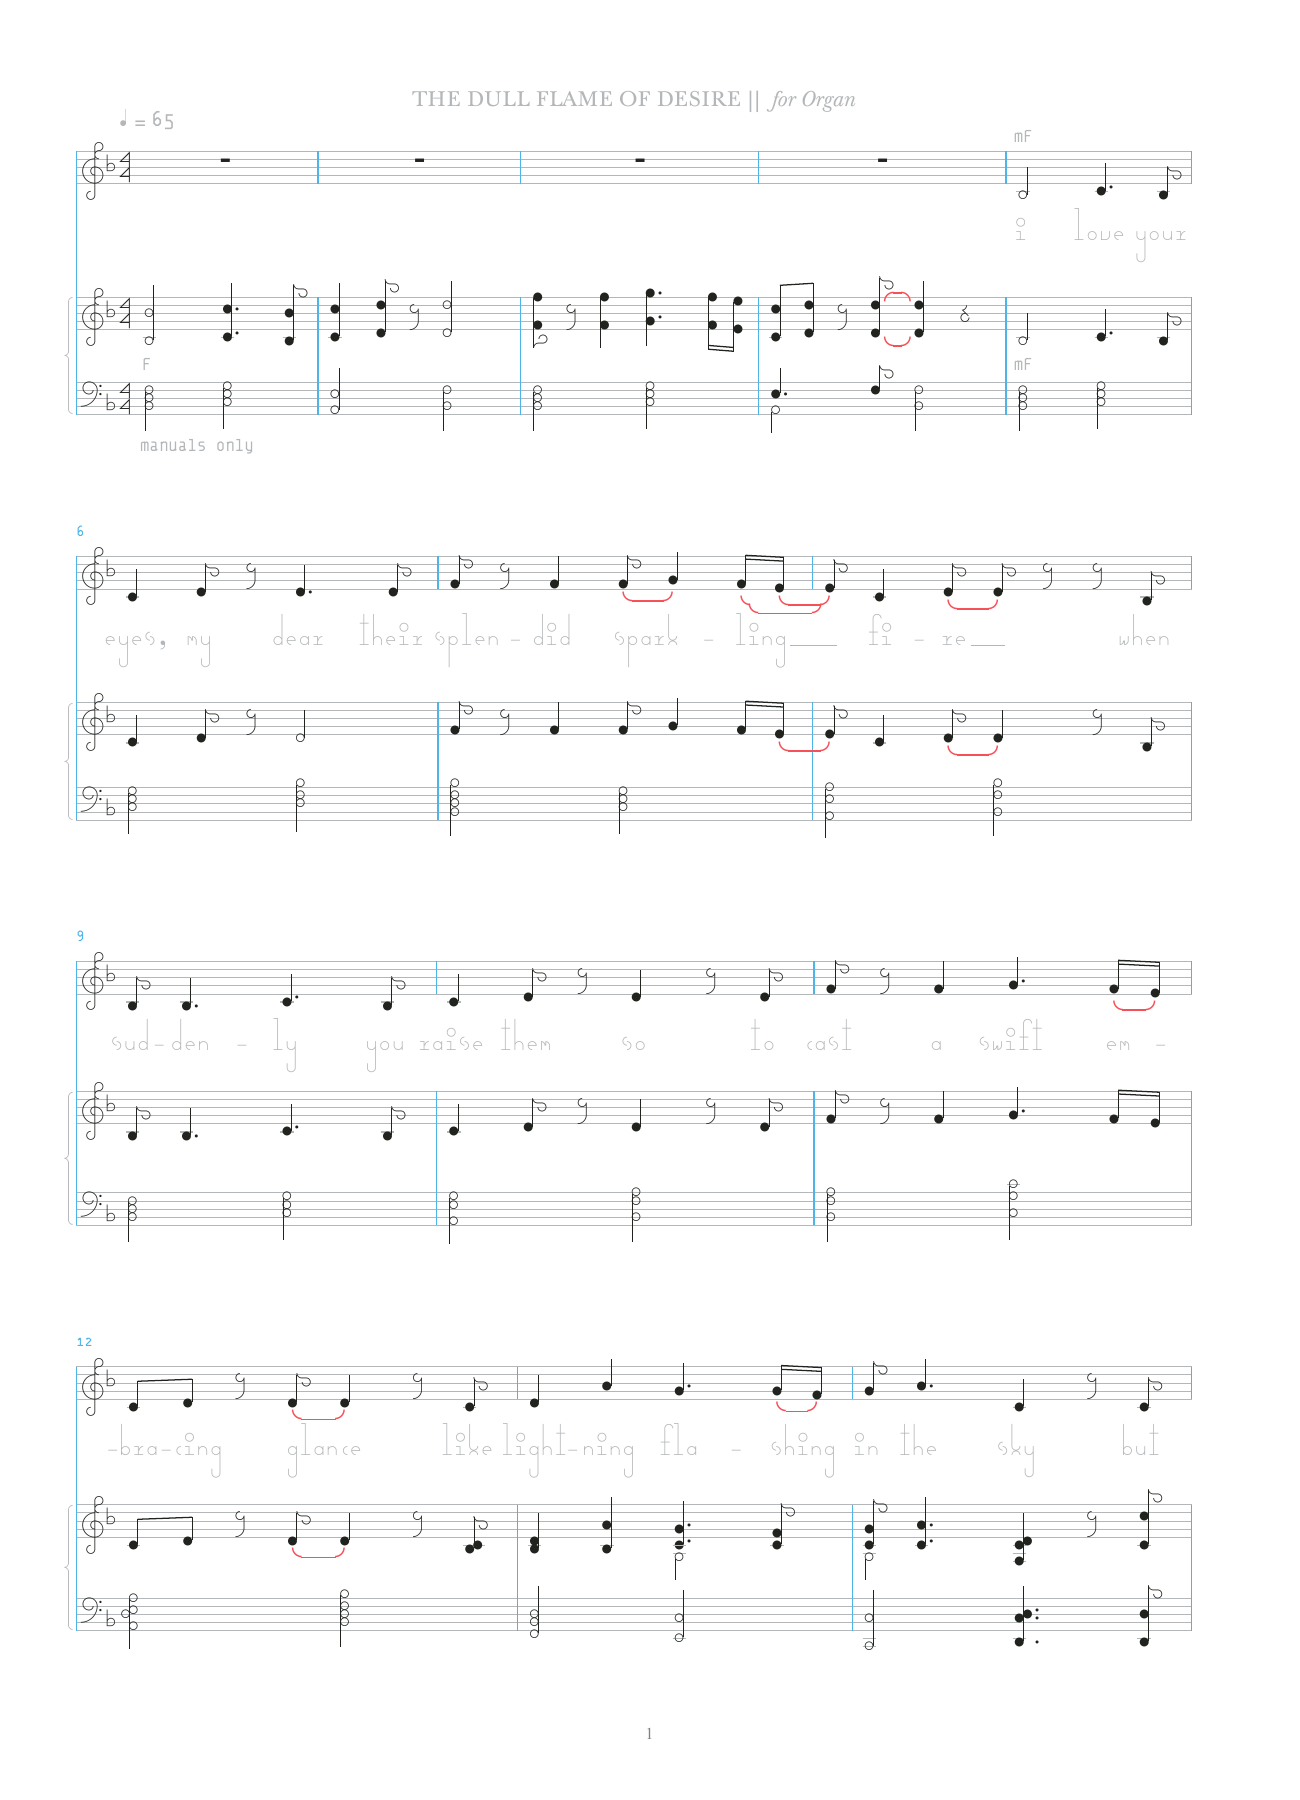 Download Bjork The Dull Flame Of Desire Sheet Music